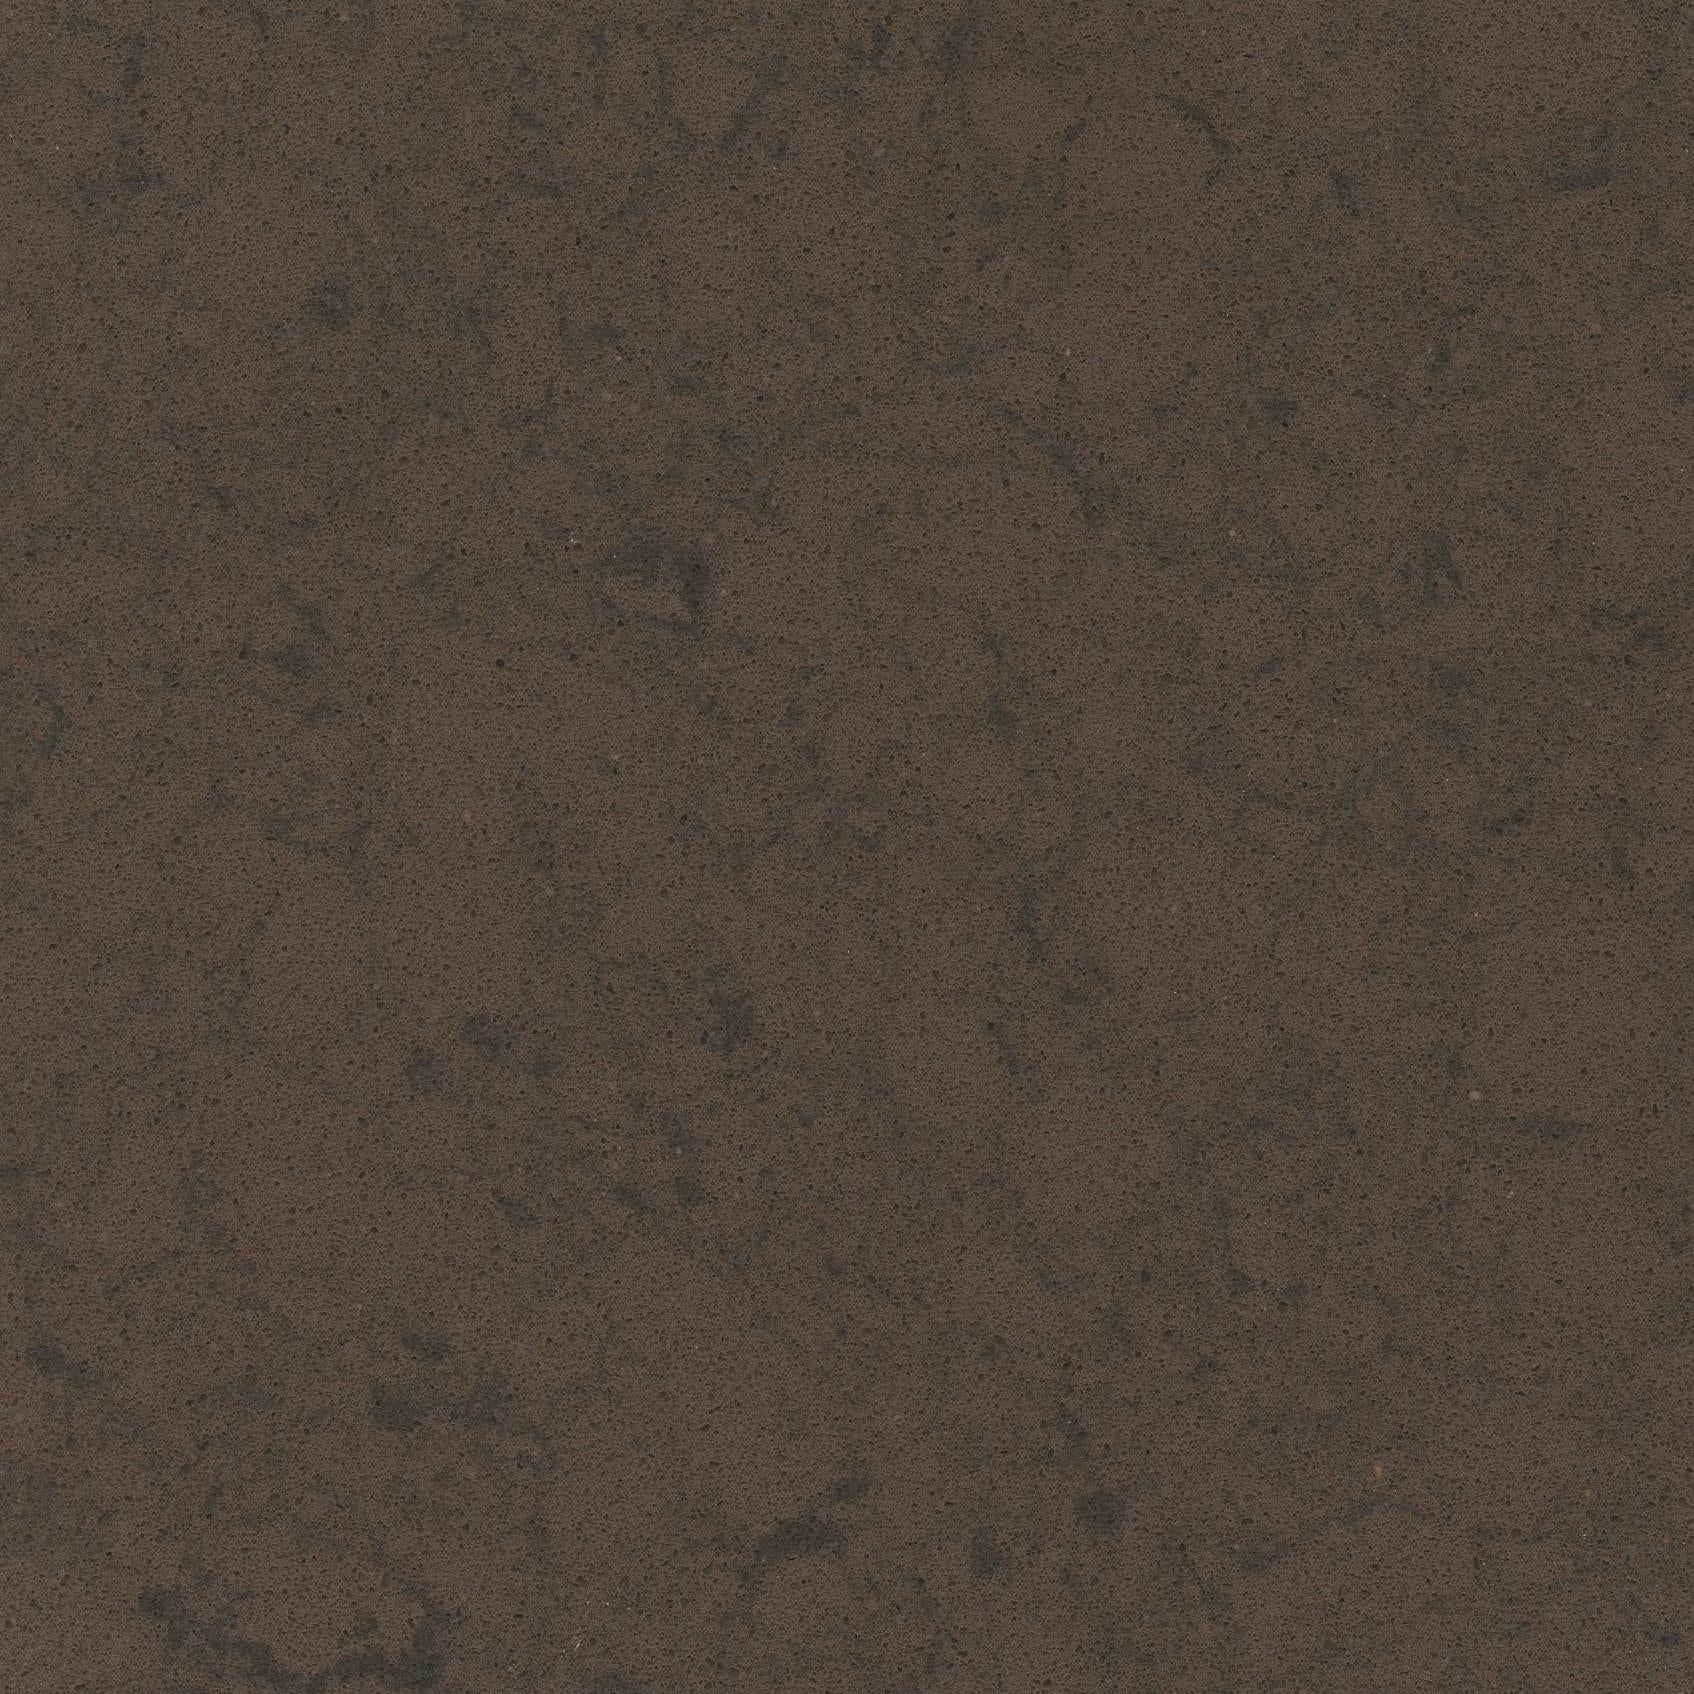 Grey Amazon, Quartz Stone Surface Material - Outlet stock from Cosentino.